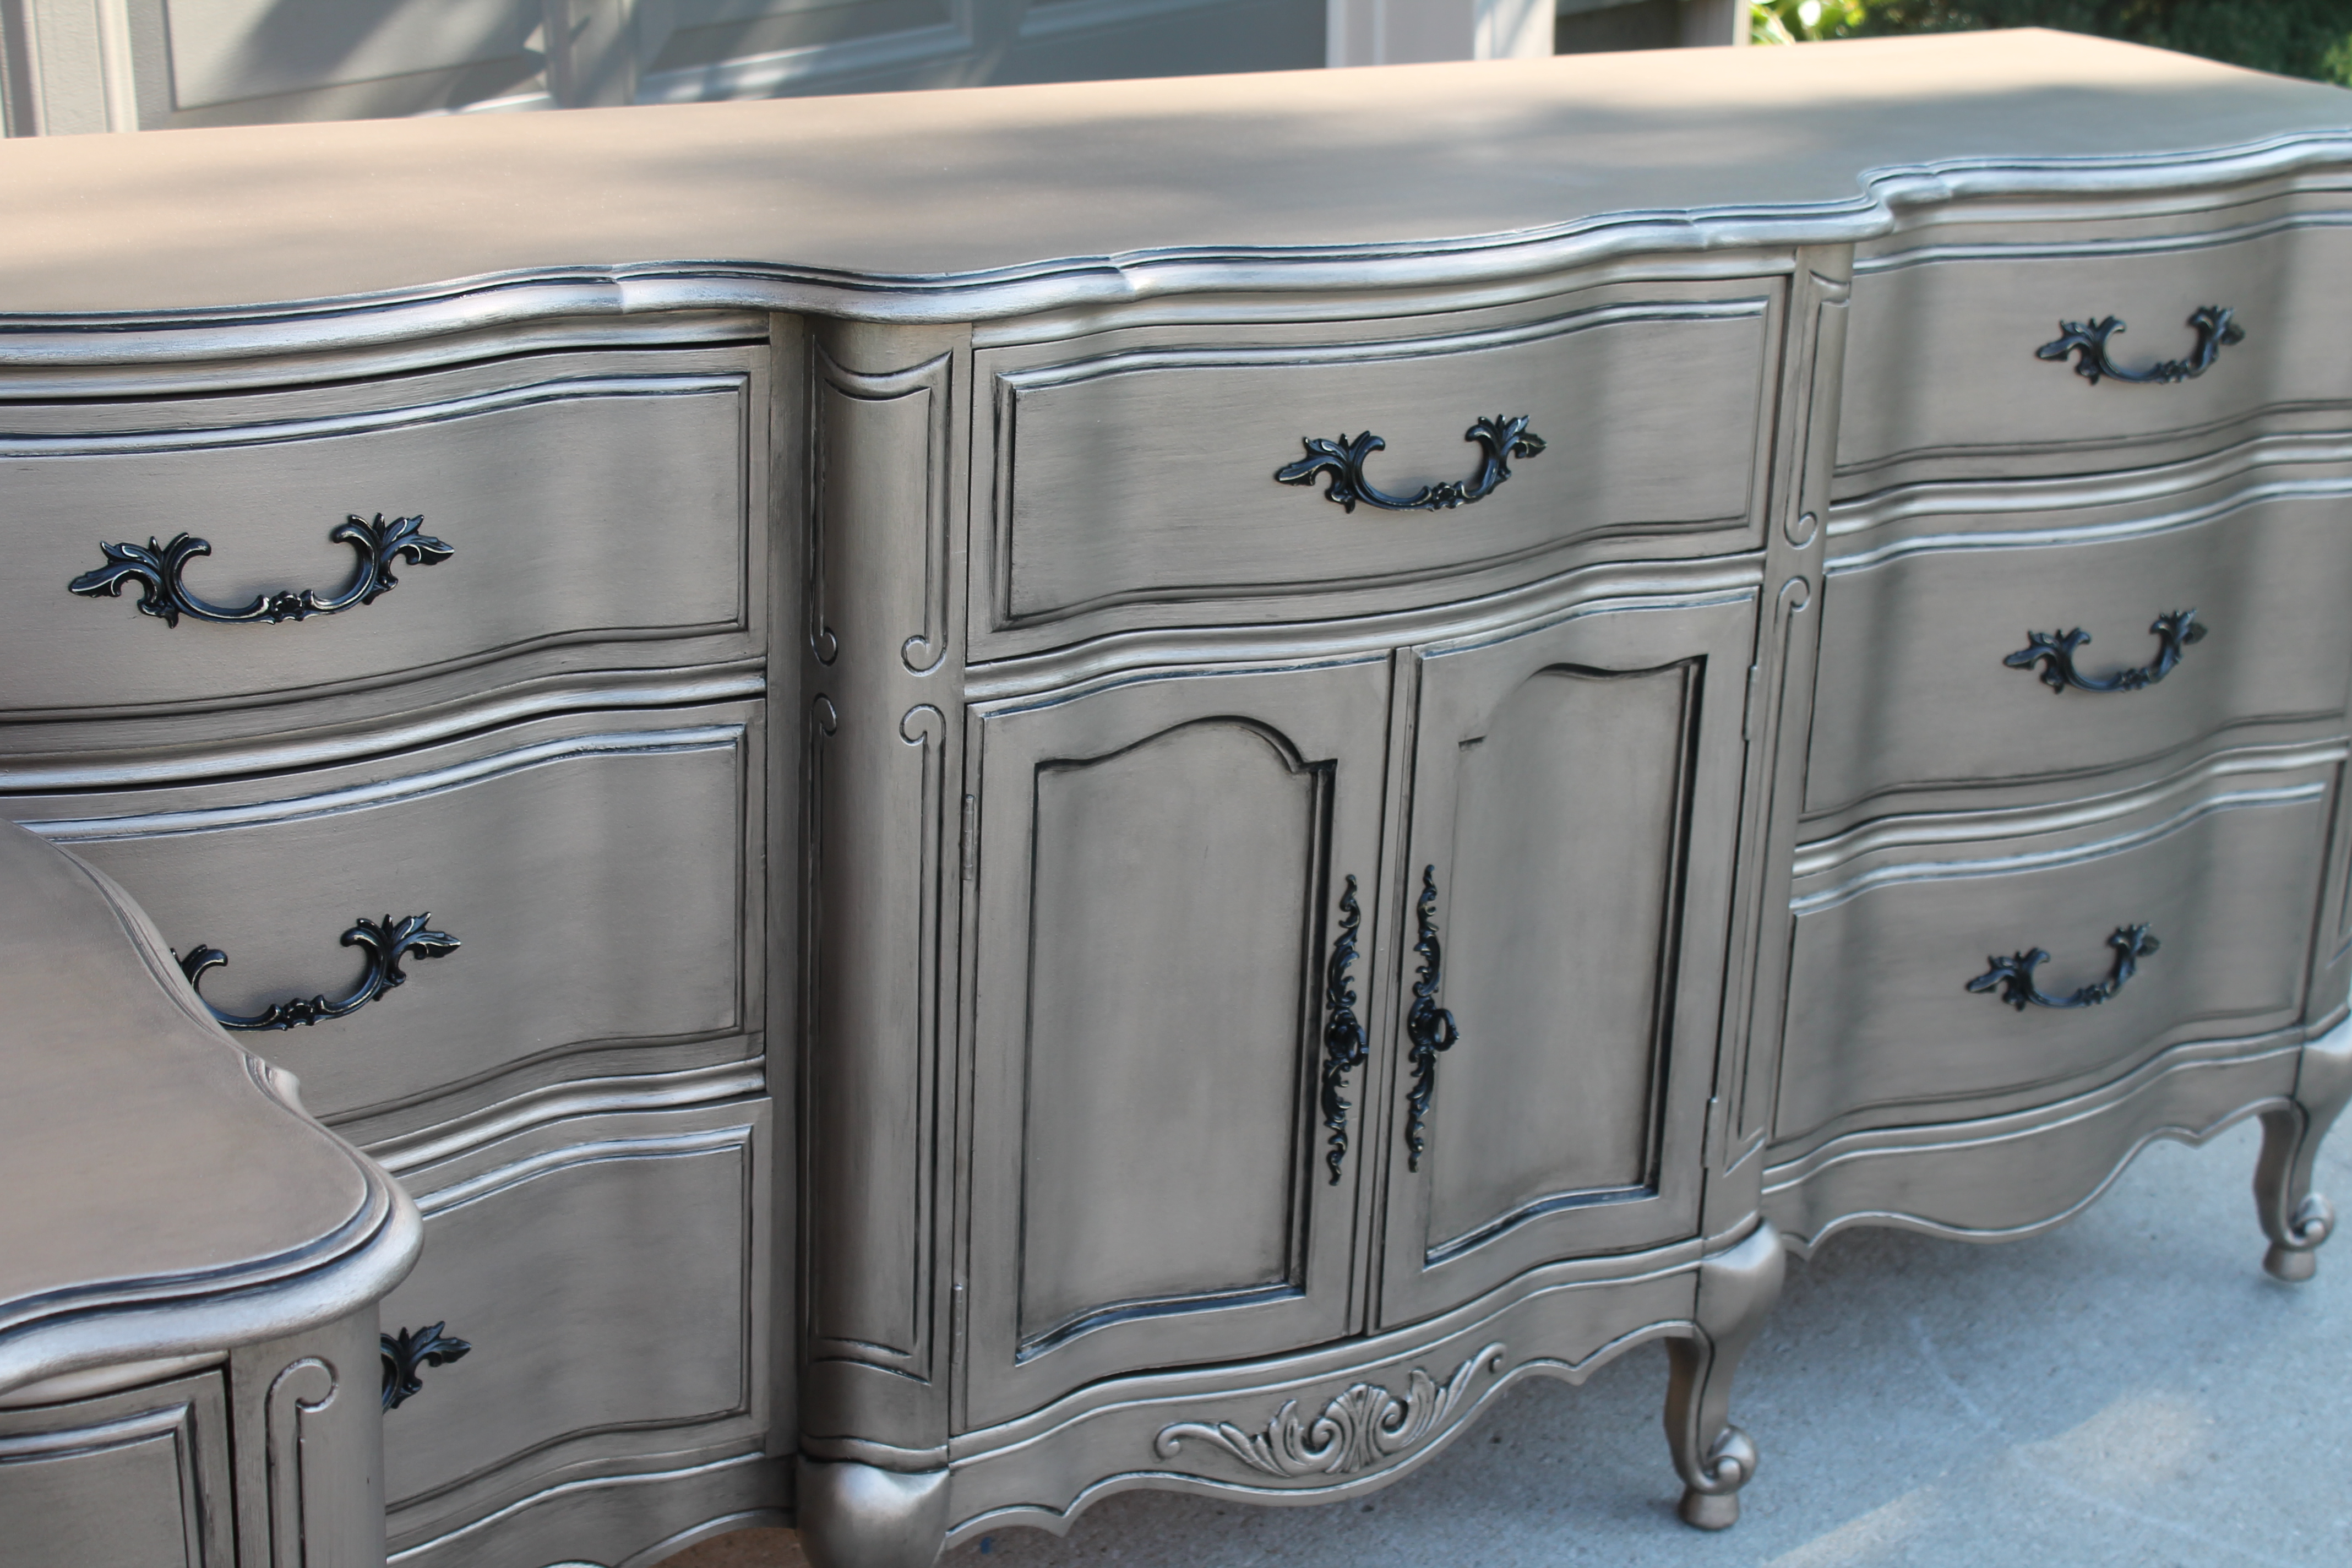 Painted Furniture Ideas  Best Paints for a Metallic Finish - Painted  Furniture Ideas